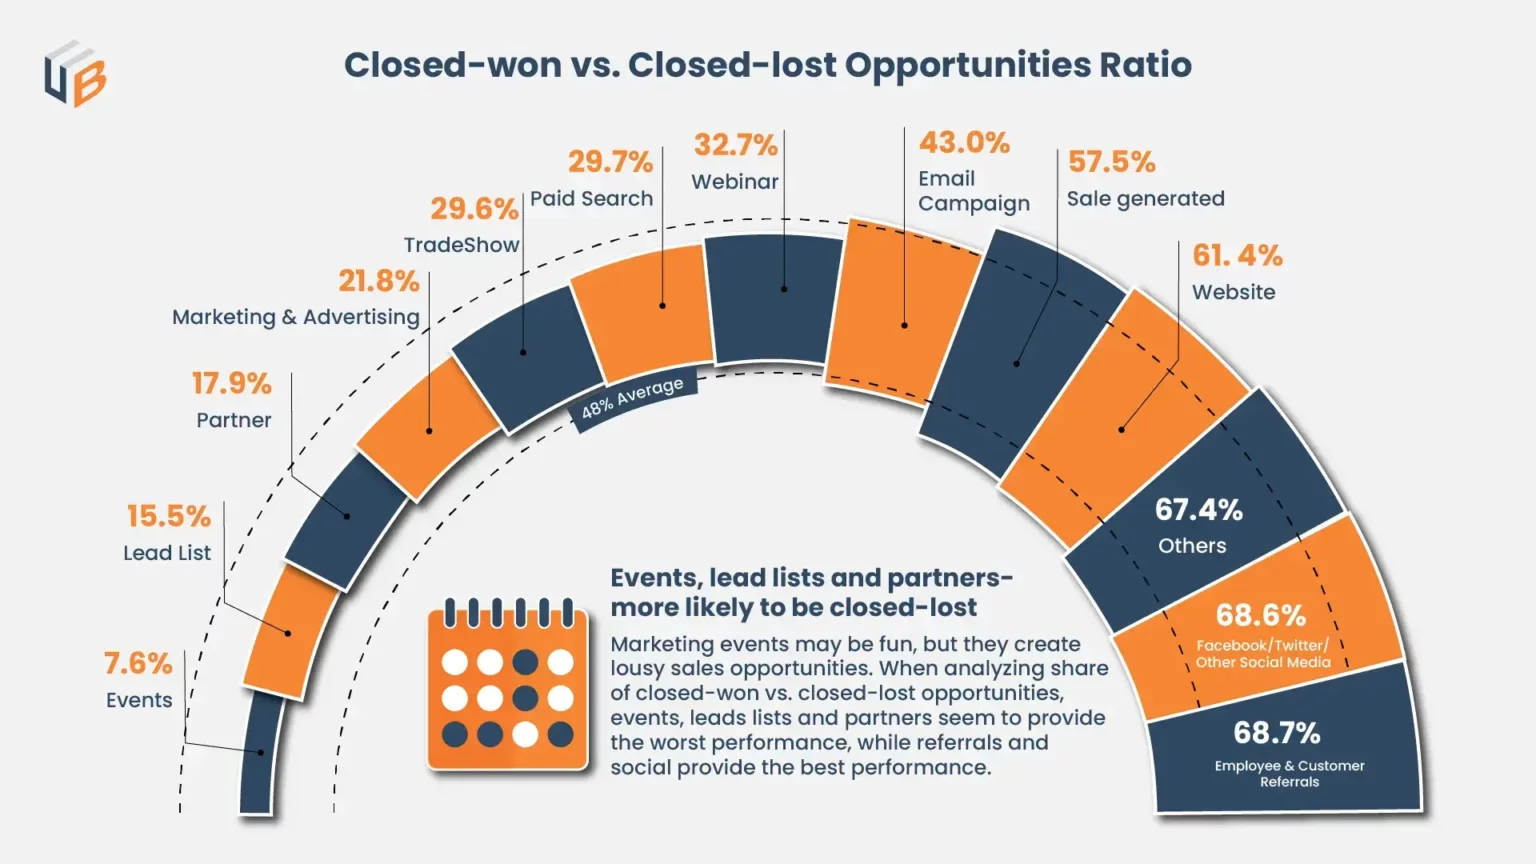 Closed-won vs. Closed-lost Opportunities ratio